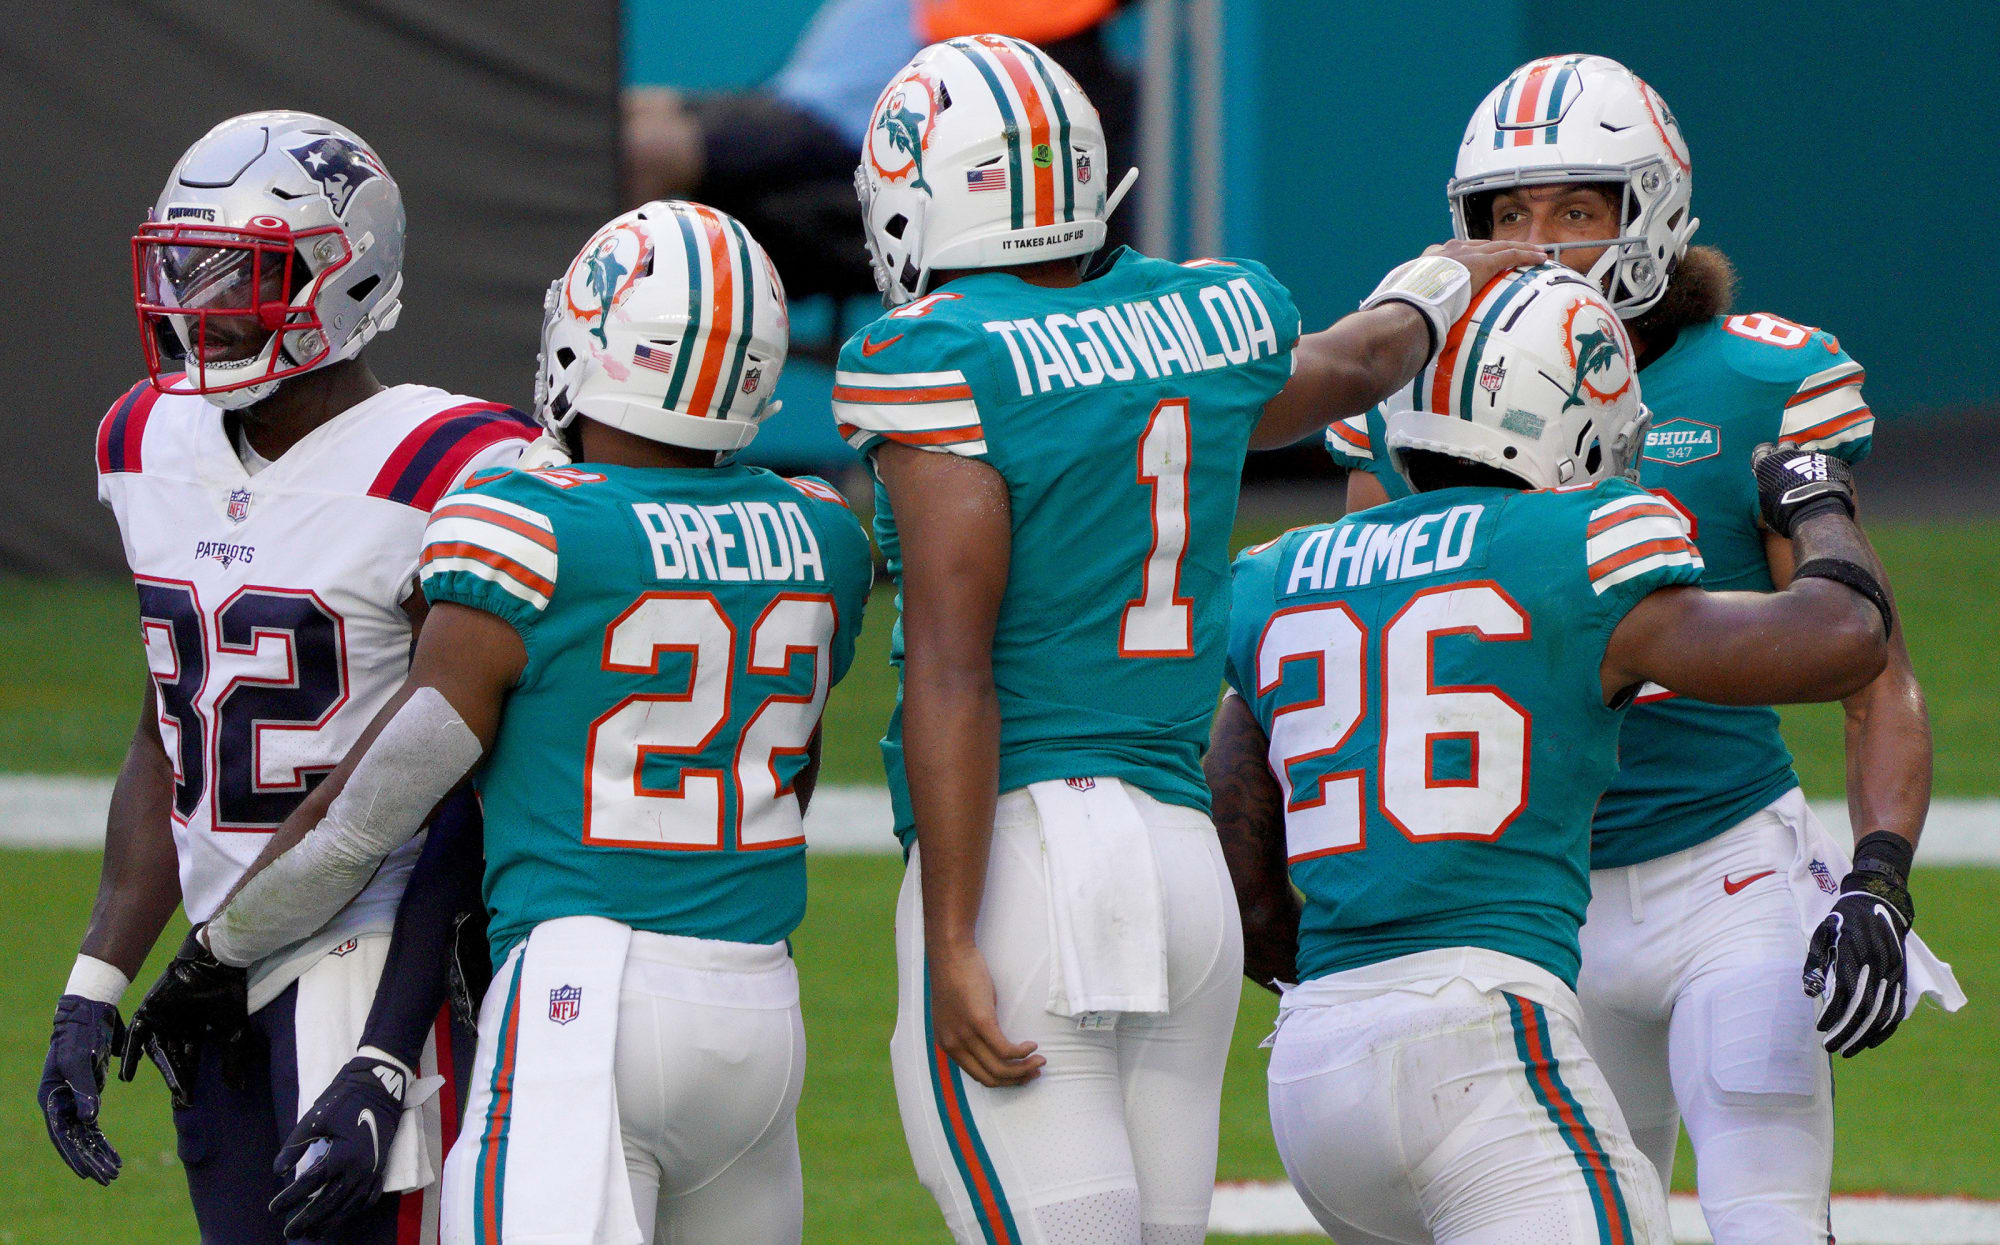 Here's what the Dolphins must do to make the AFC playoffs